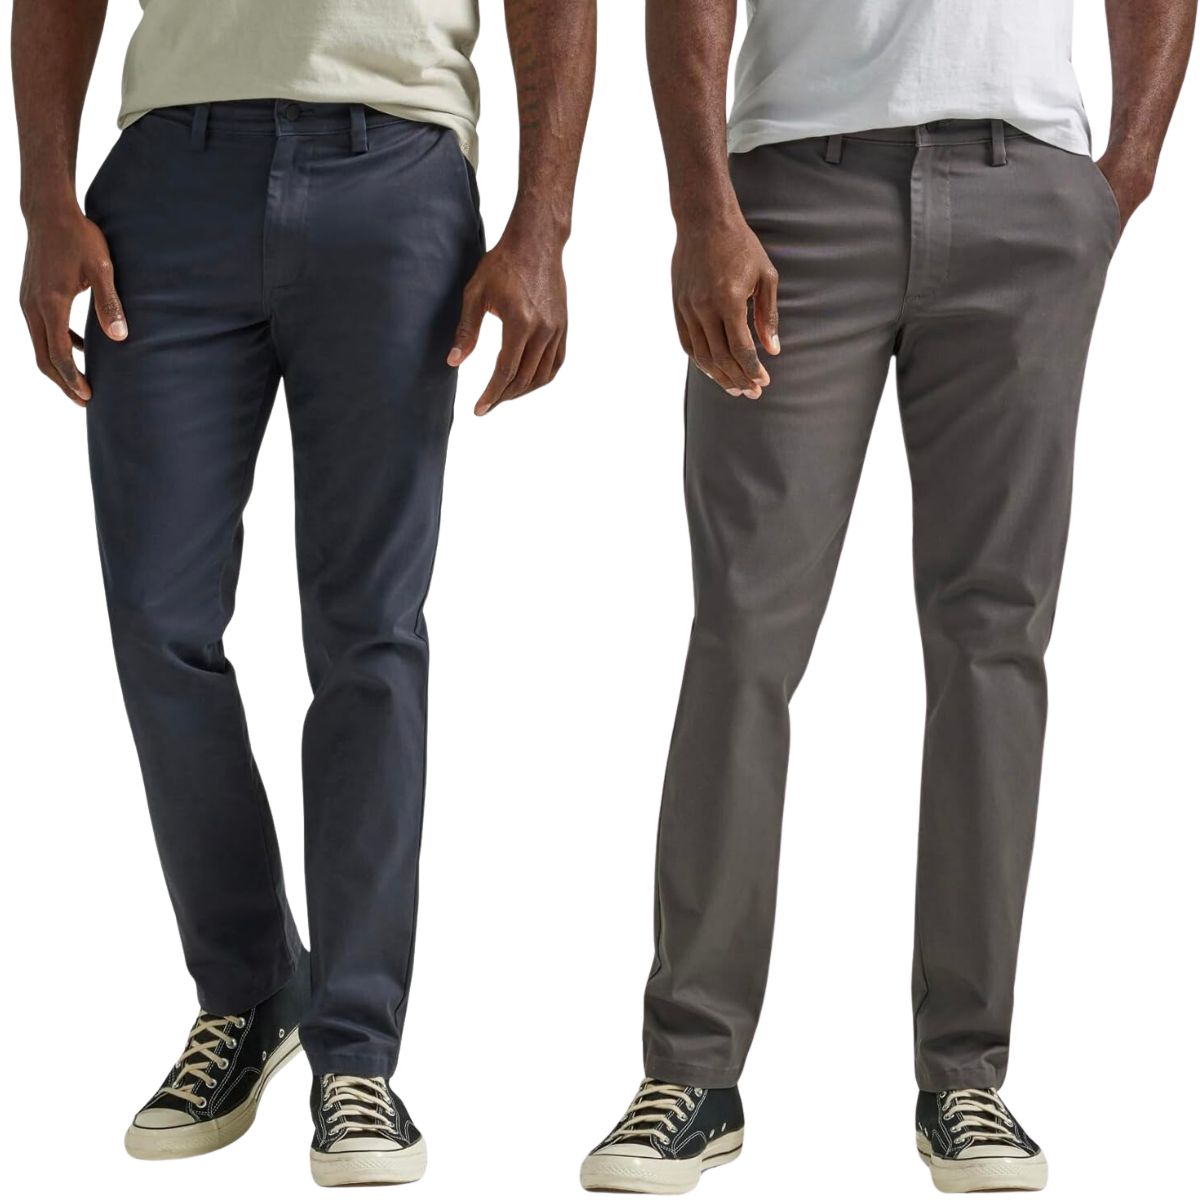 two male models wearing Lee Men's Flat Front Slim Straight Pant navy and gray